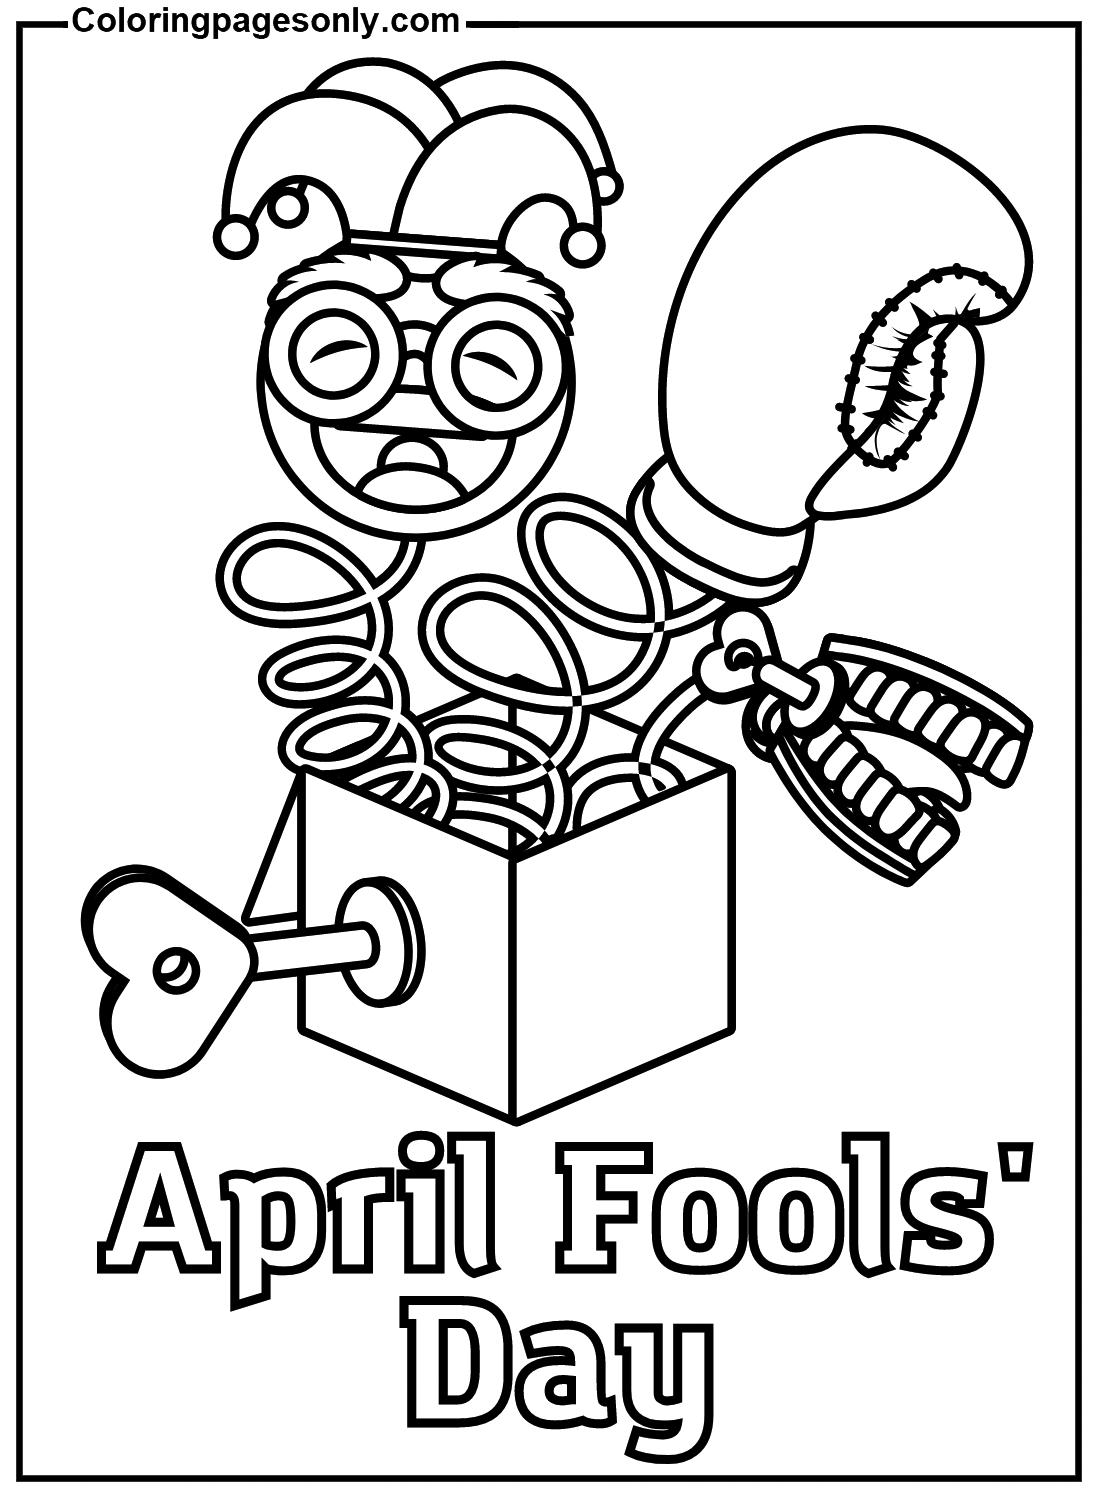 April Fools' Day Free Coloring Pages